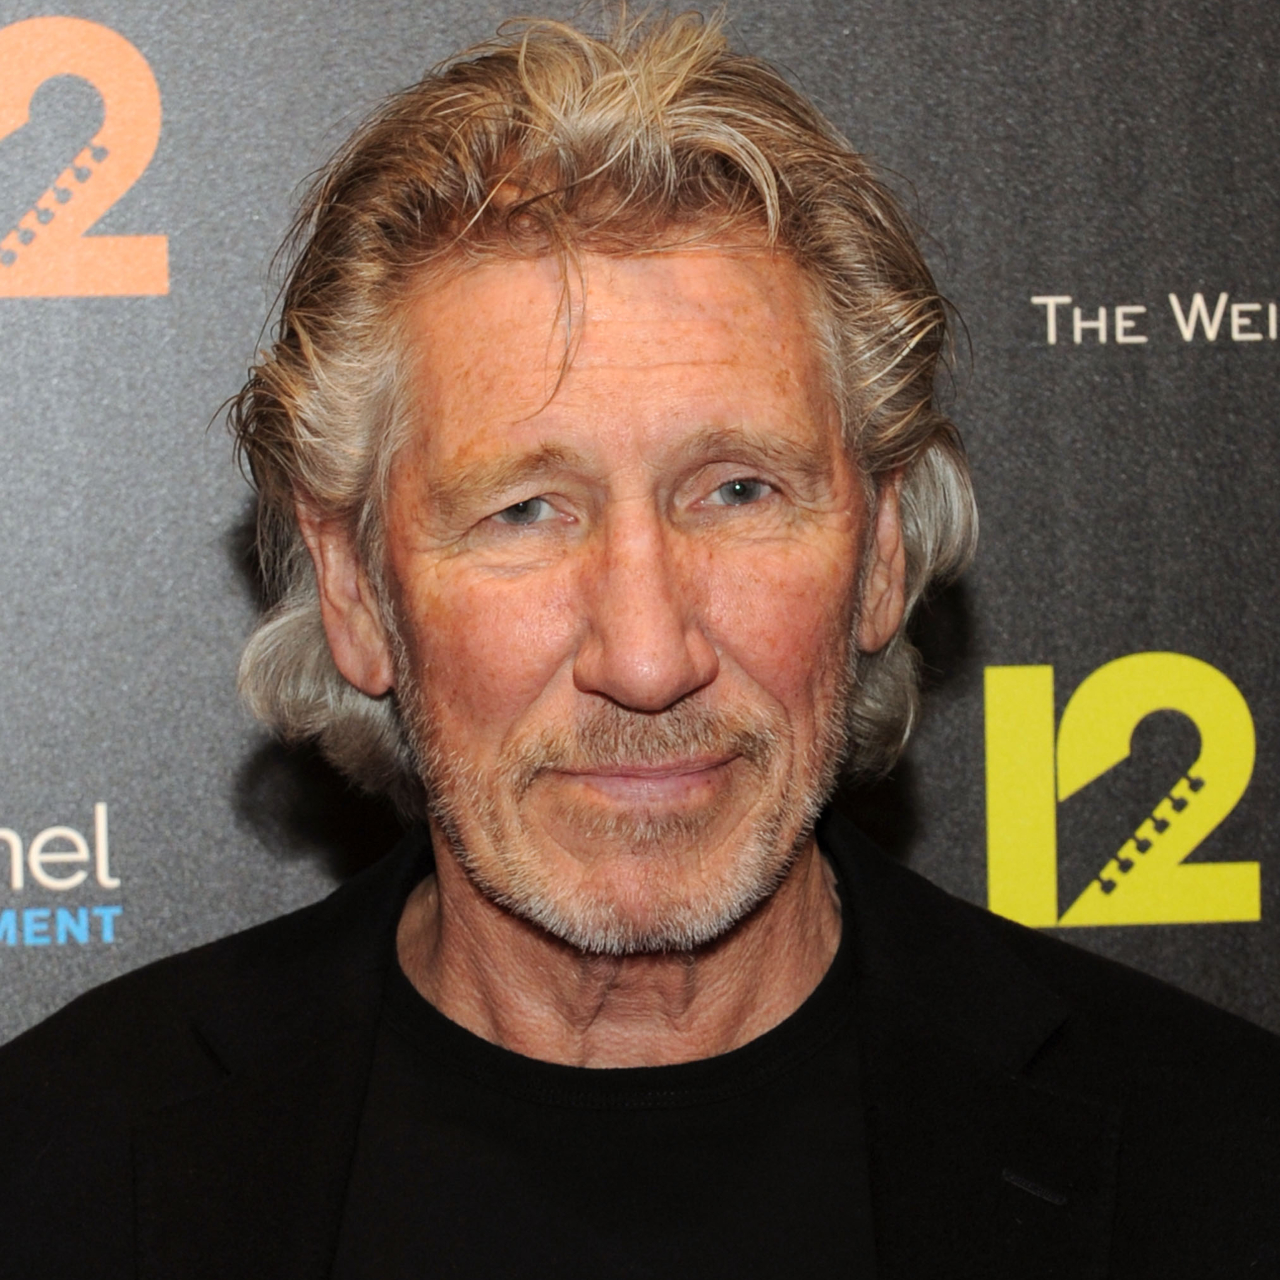 Roger Waters, ex-integrante do Pink Floyd